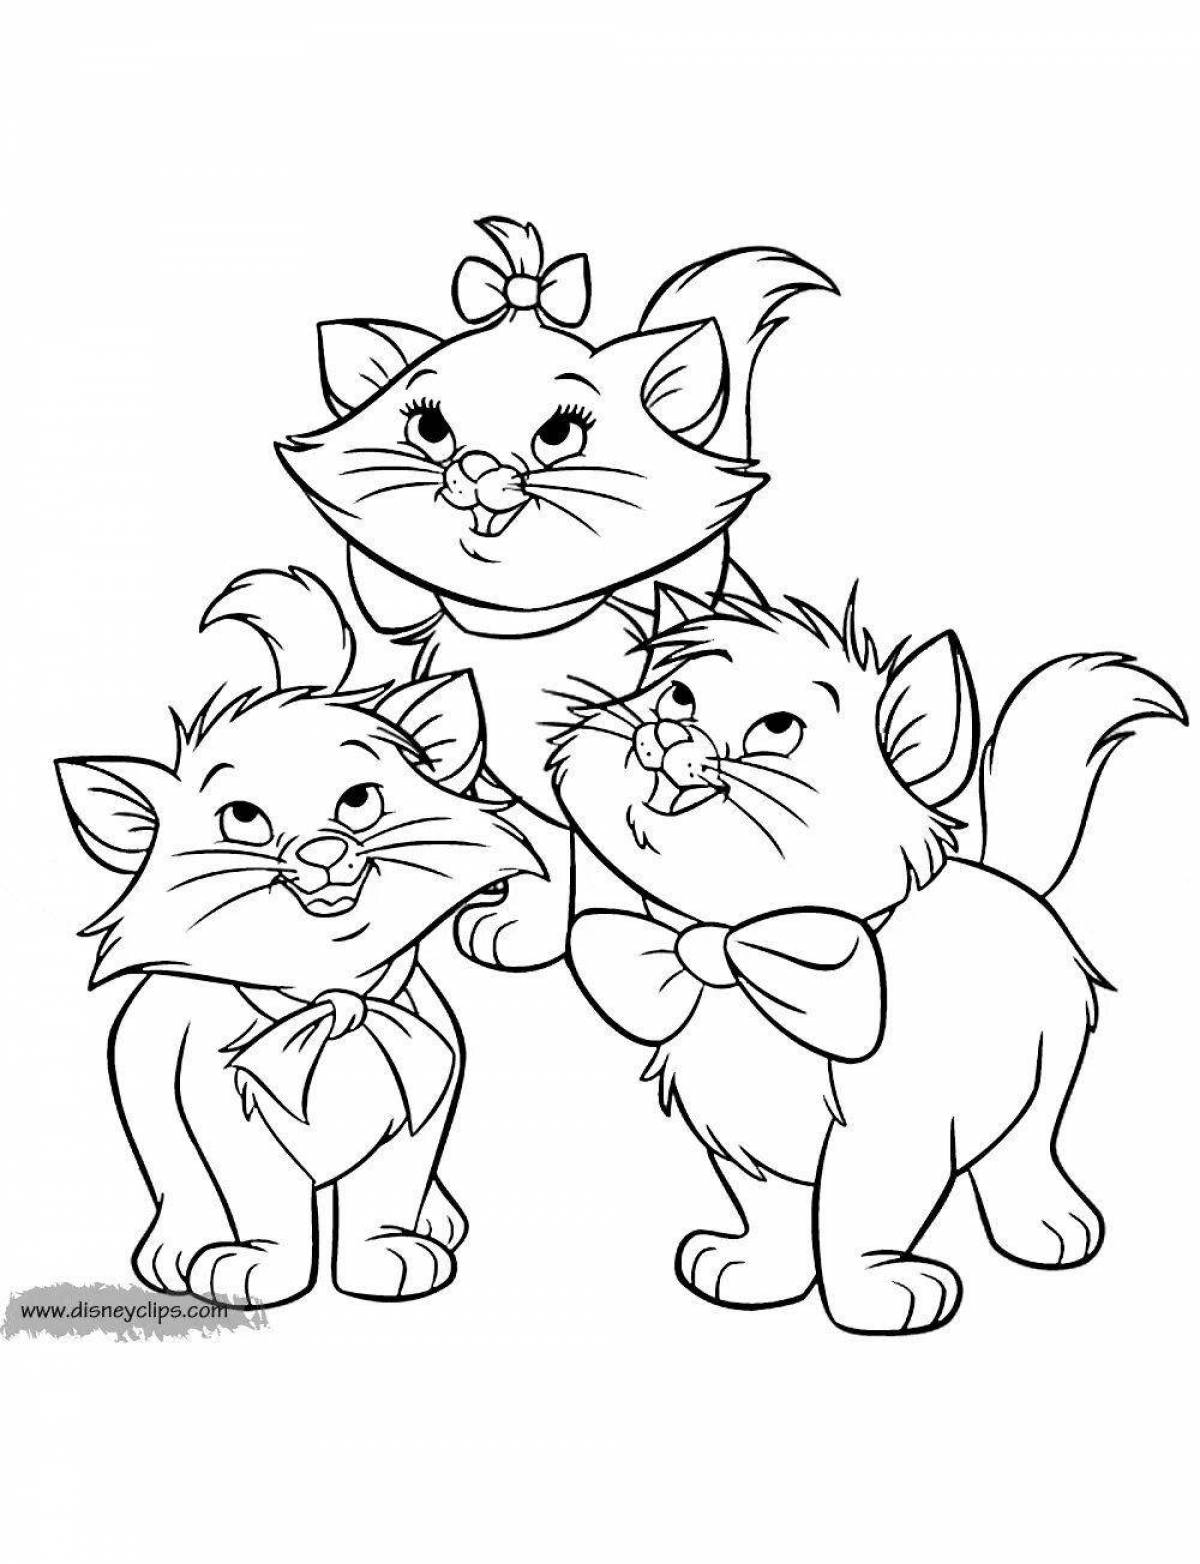 Loving moment of cat family coloring